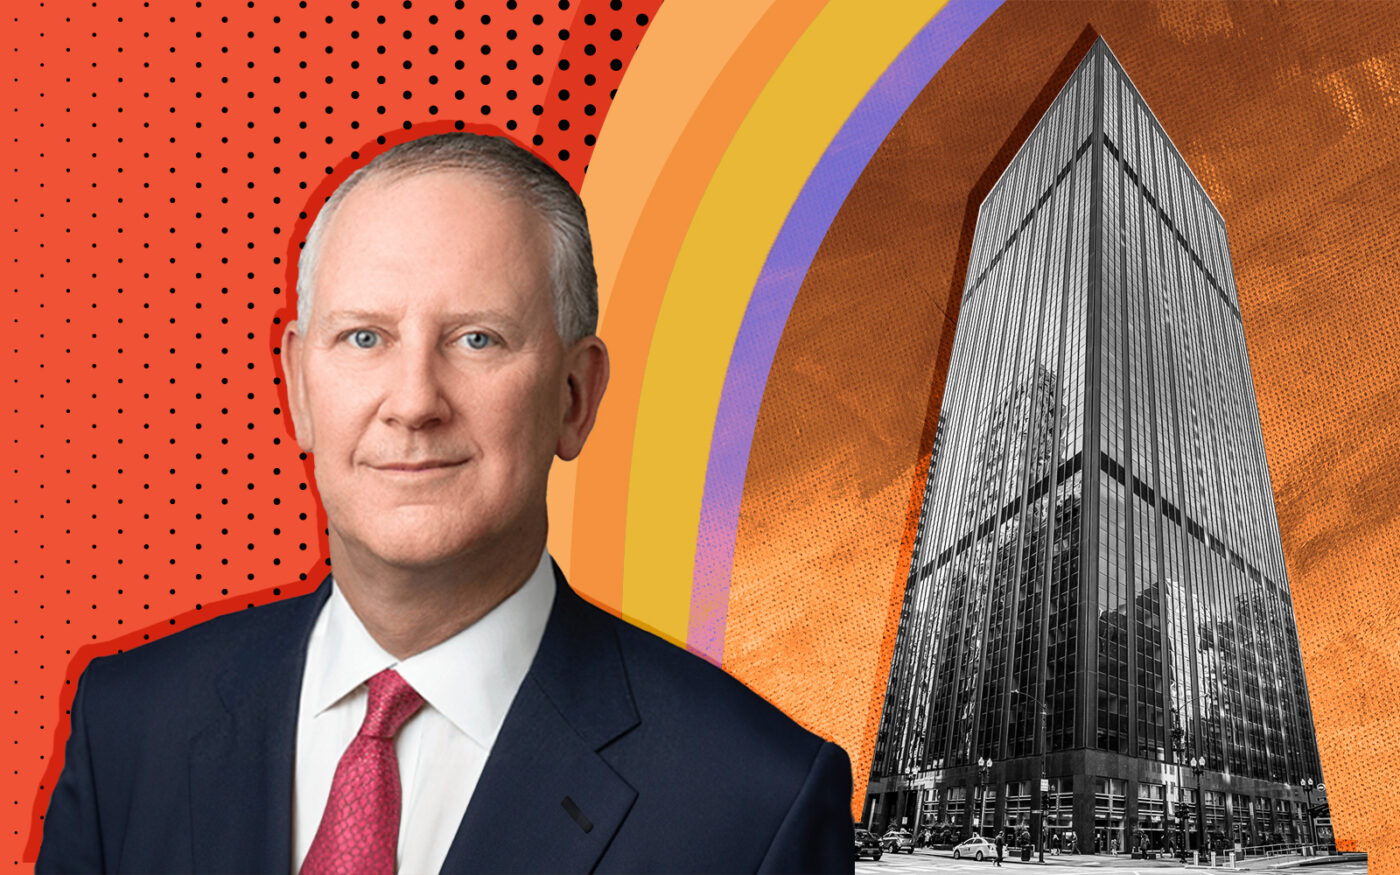 Lender Takes LaSalle Street Tower After Auction Strikeout